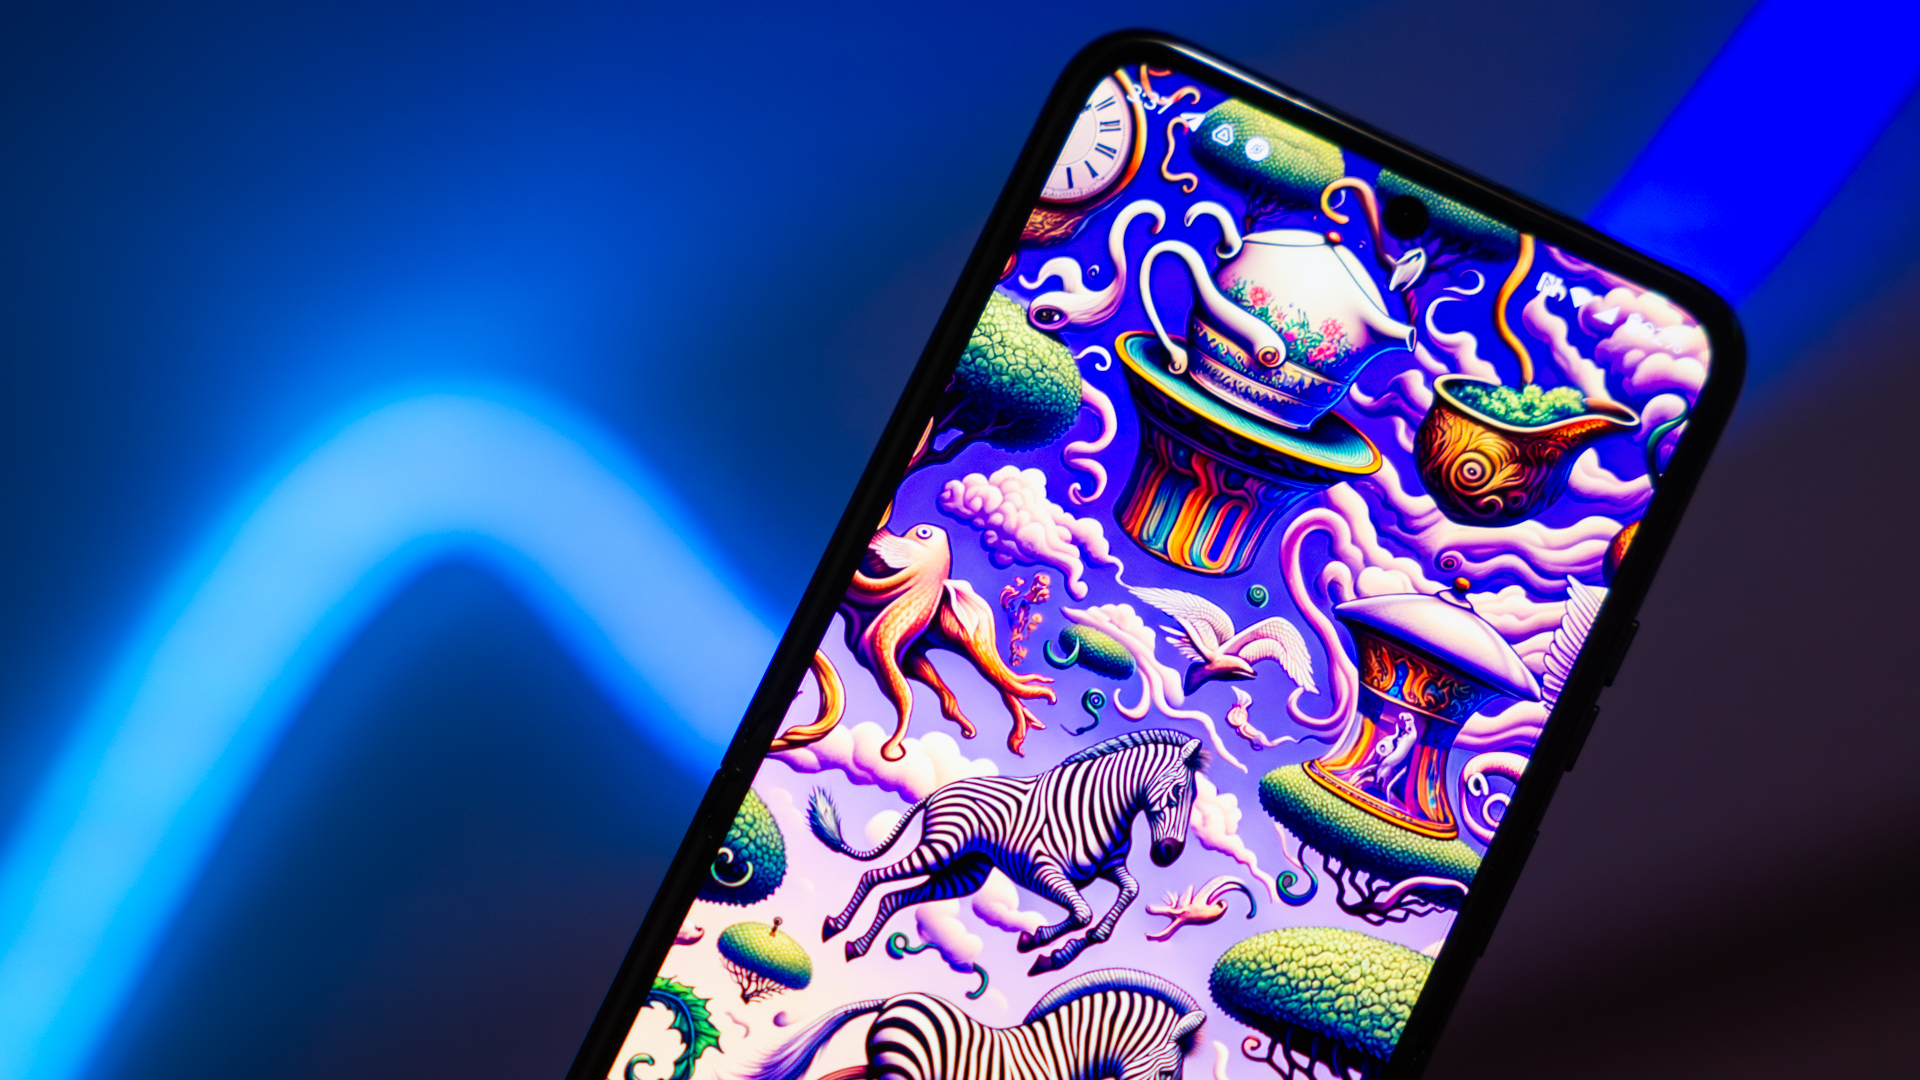 Stock photo of smartphone with an eccentric wallpaper